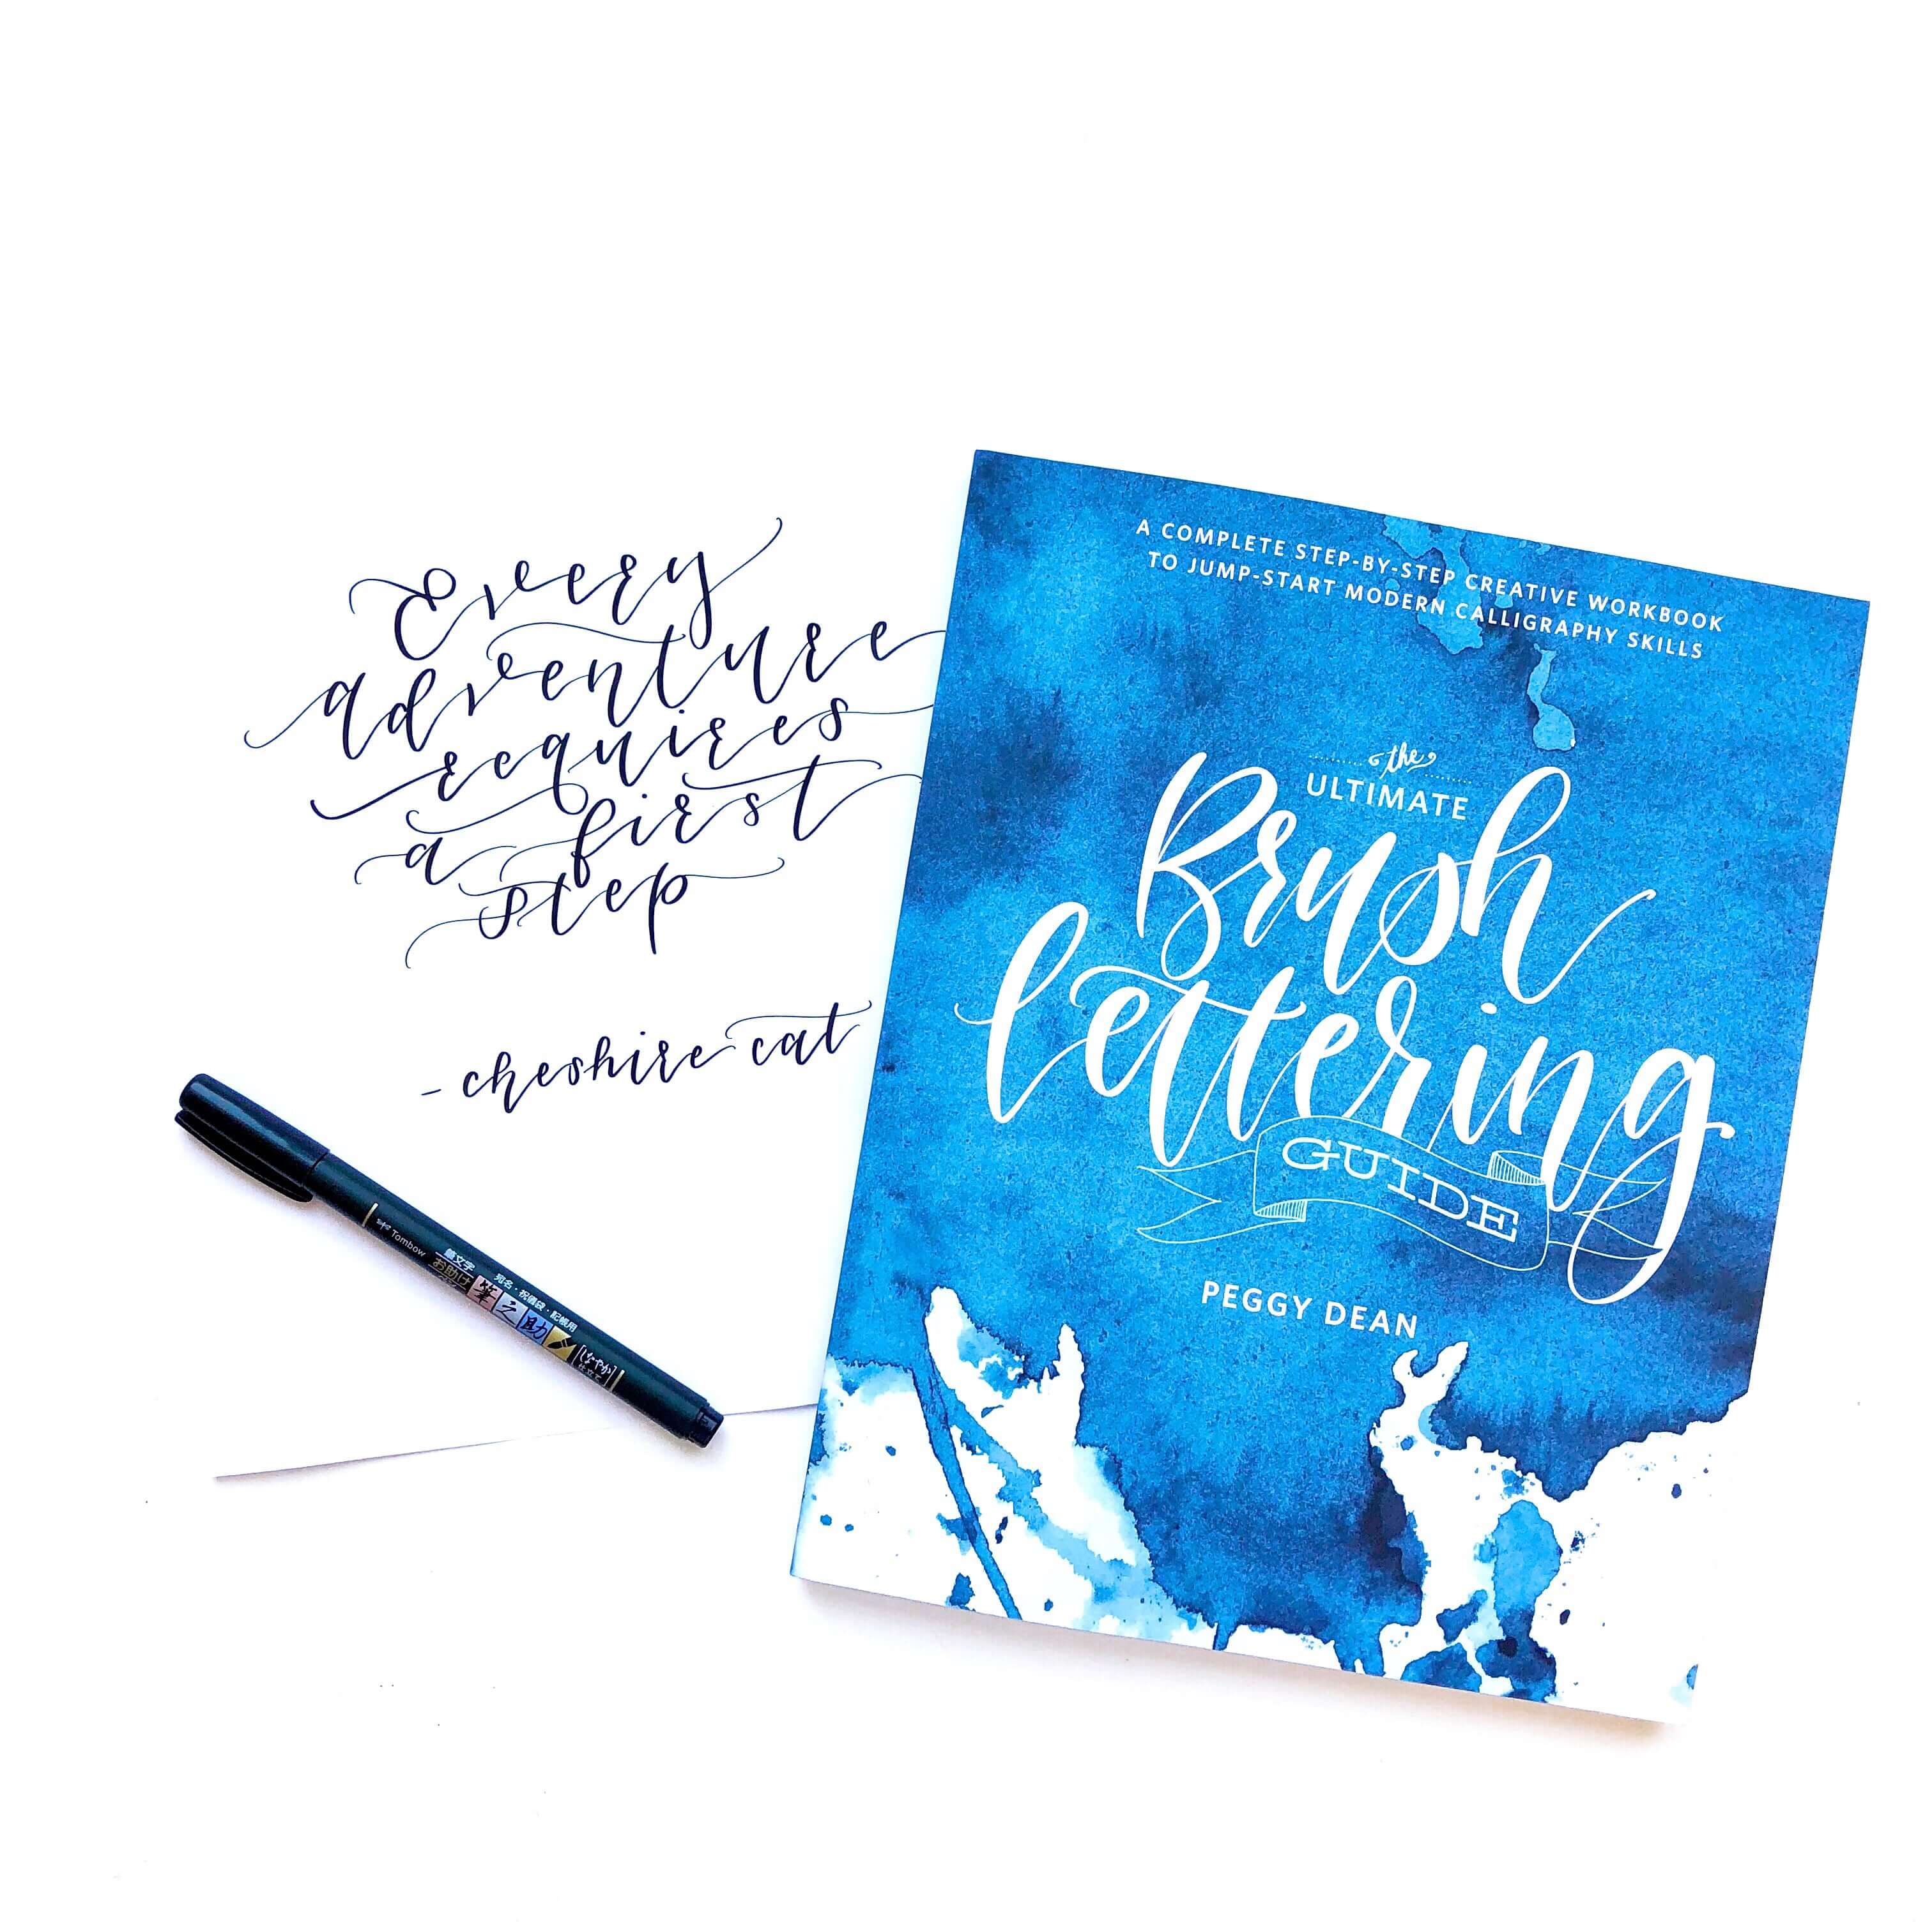 Modern Calligraphy: 4 Easy Steps to Go From Beginner to Brush Lettering Pro, Peggy Dean